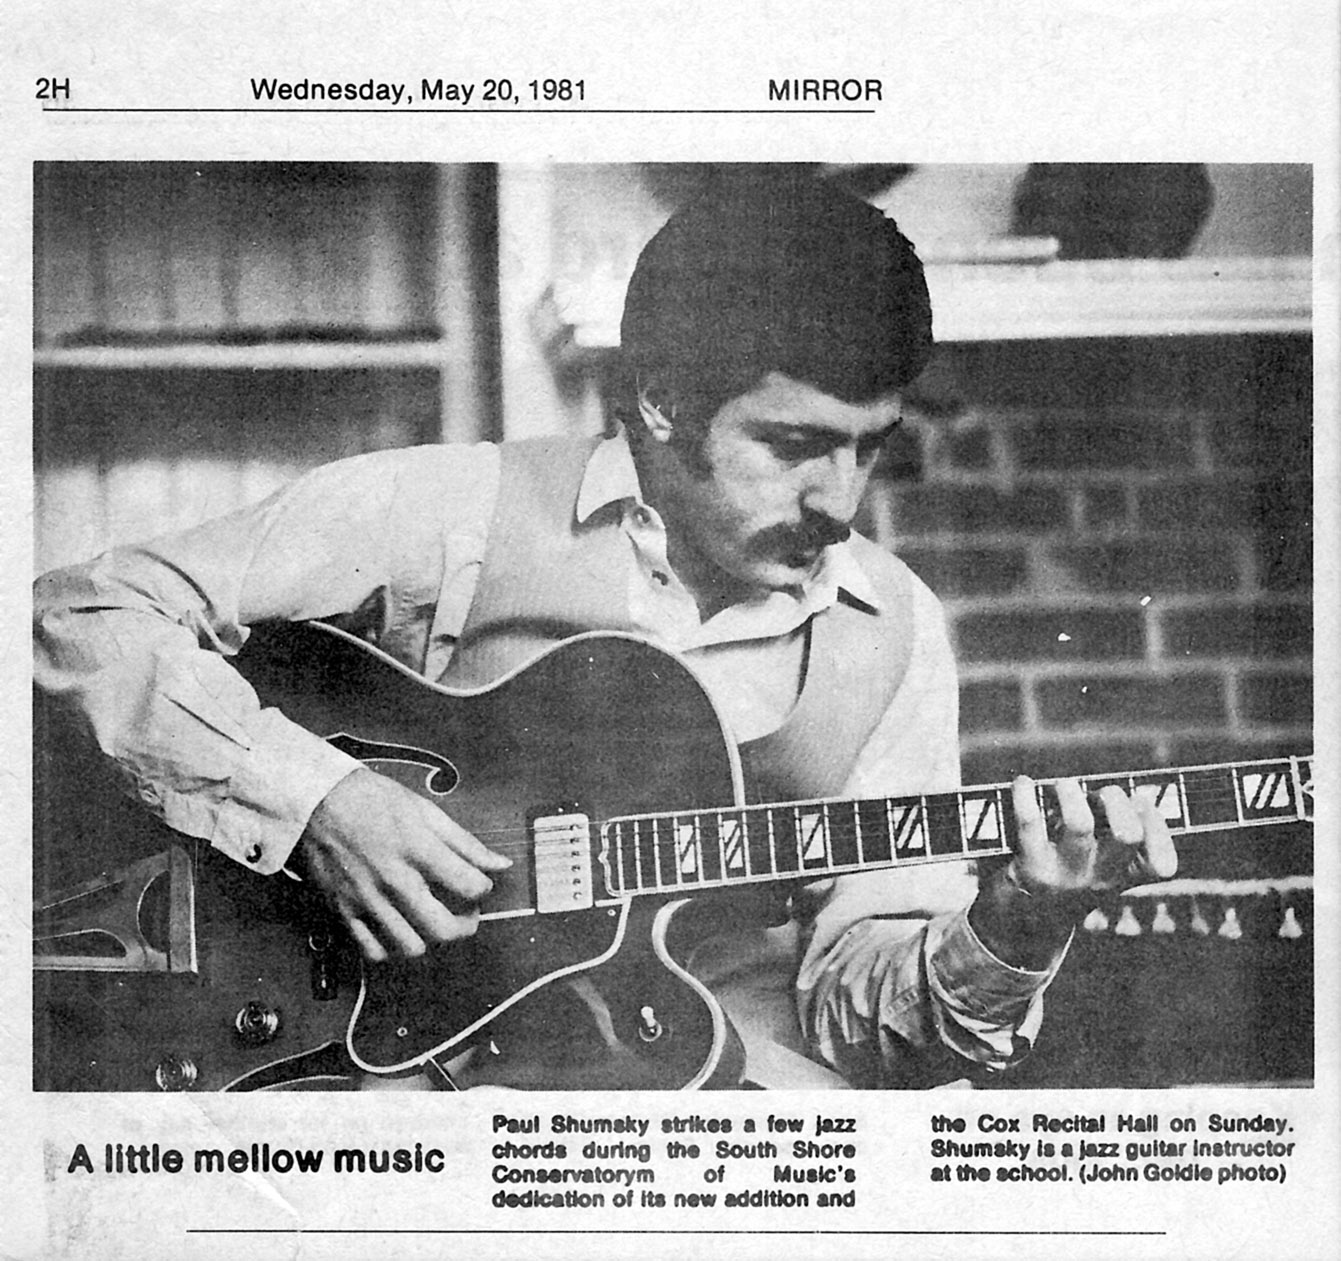 Playing some solo guitar on my good ole Gibson Super 400 which I had bought from Duke Robillard and eventually sold to my student Evan Goodrow. How 'bout those sideburns?!